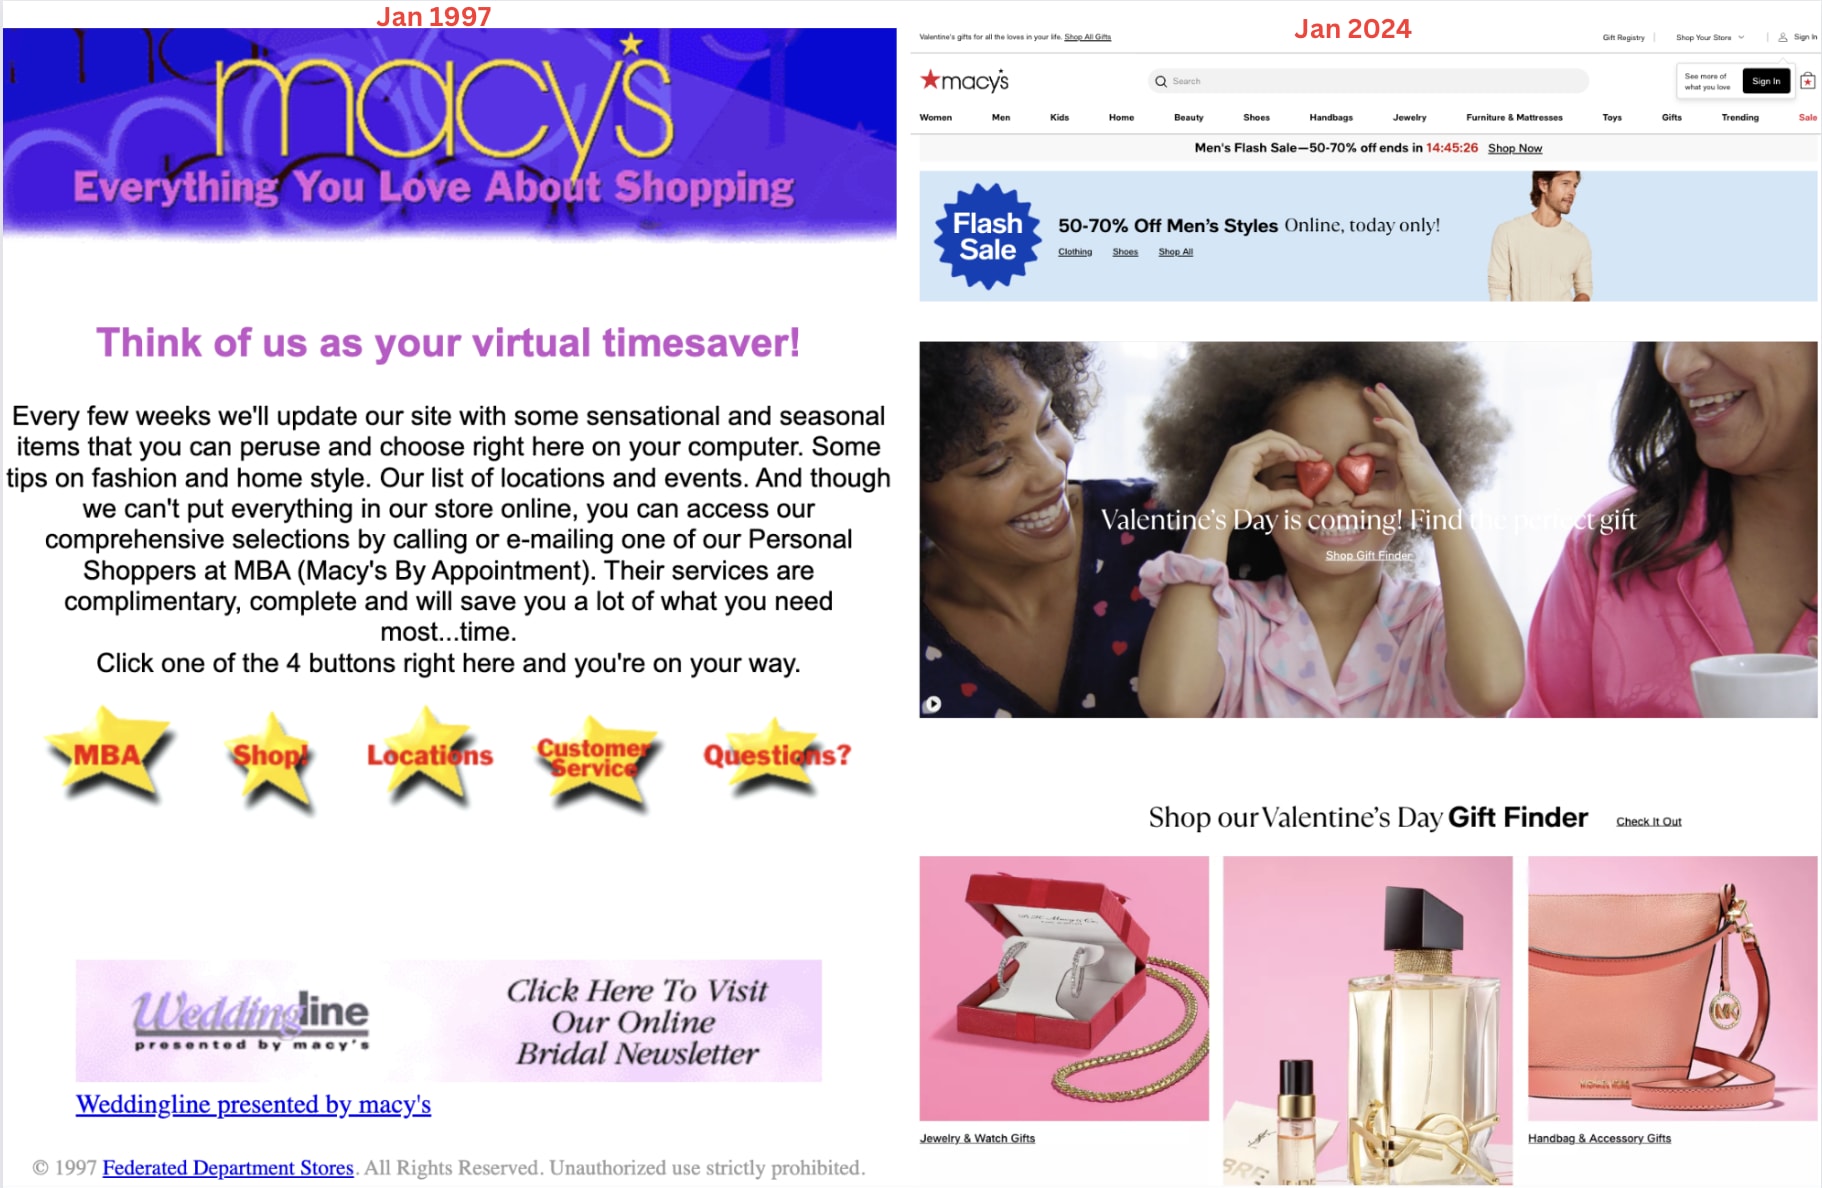 Image comparison of Macy's old website version vs the new version